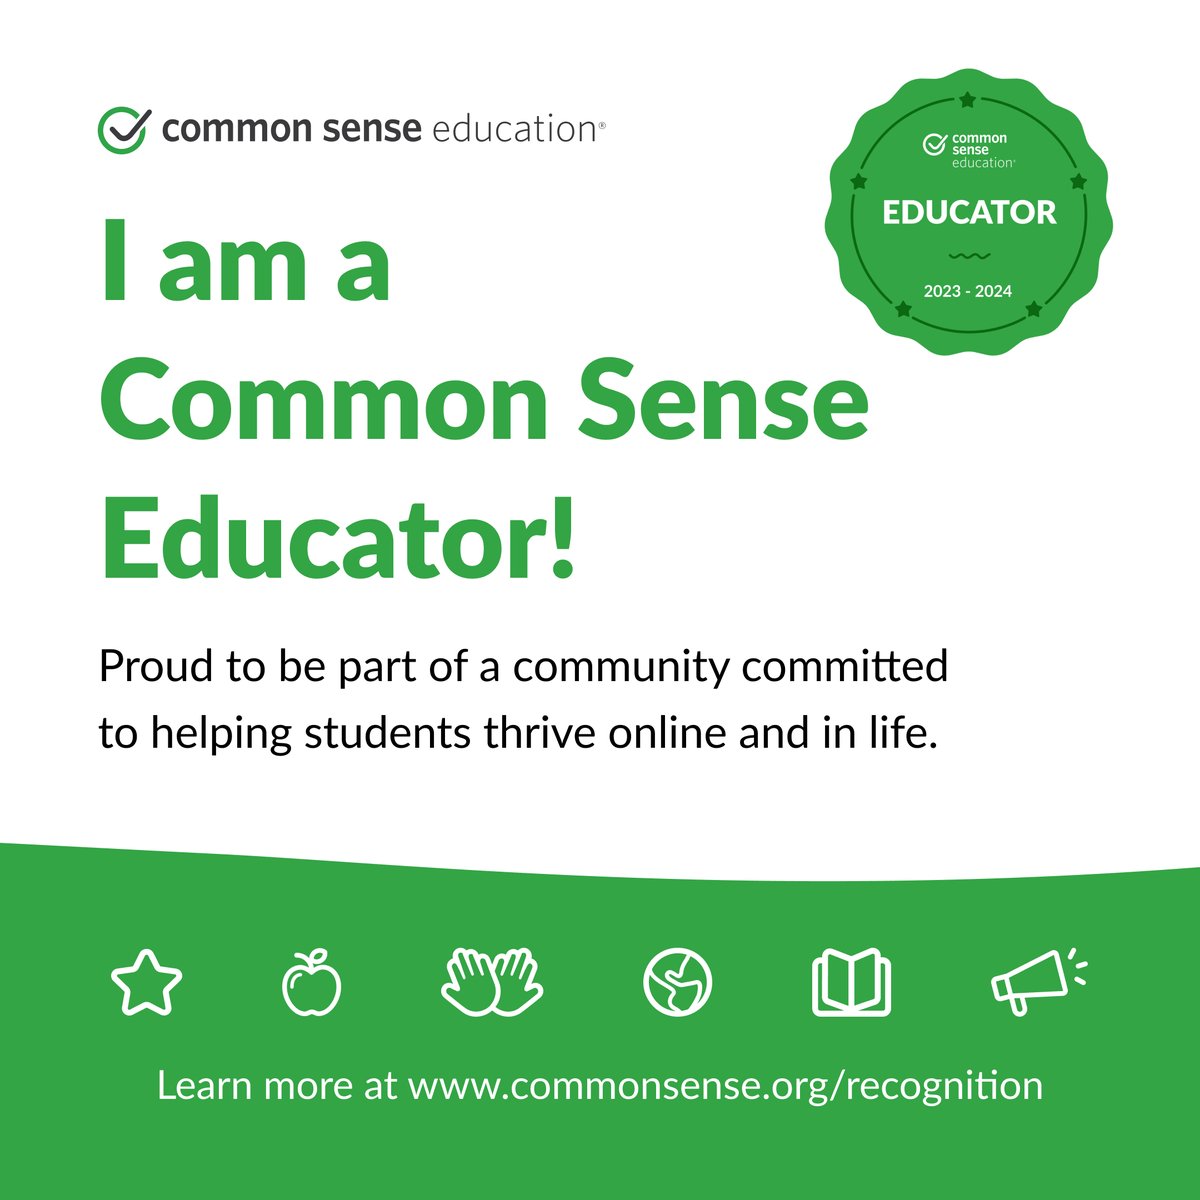 Excited to announce I recently became a #CommonSenseEducator ! @Jehehalt